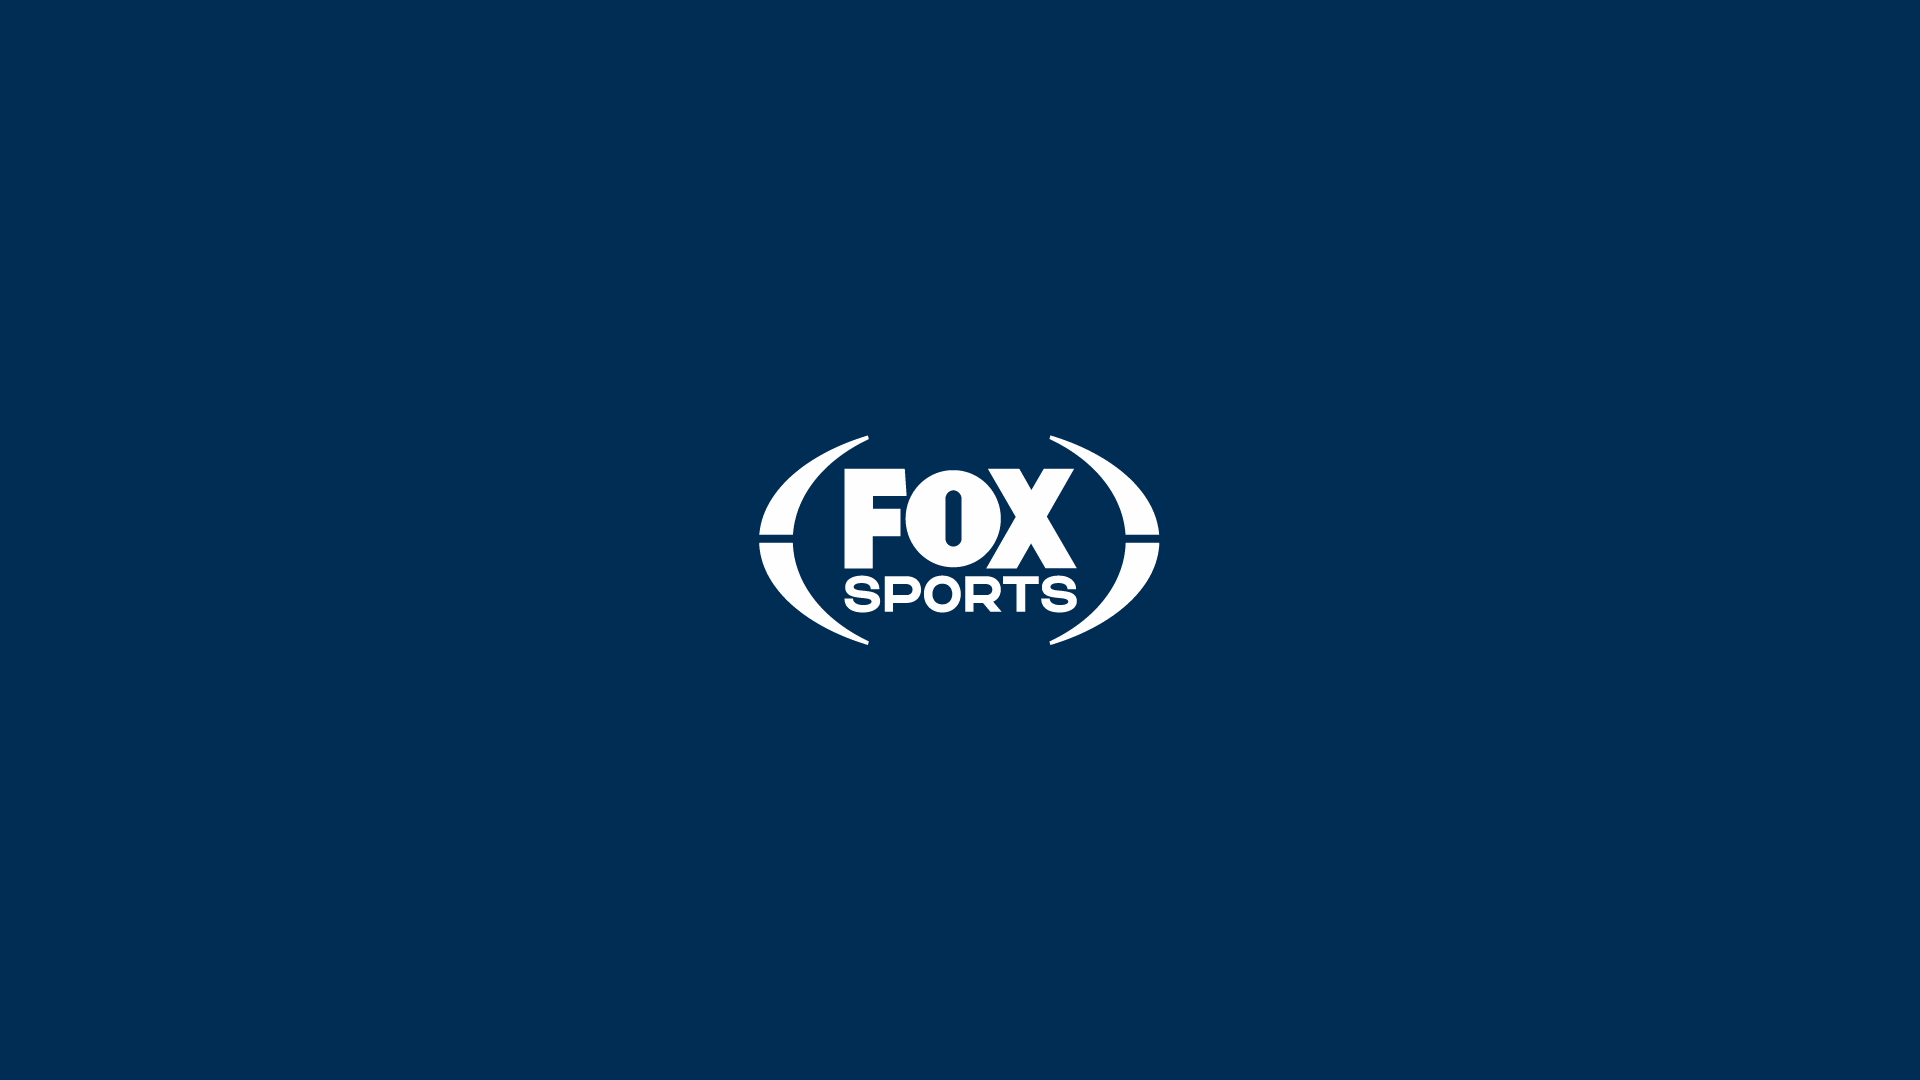 Fox Sports Logo - Brand New: New Logo, Identity, And On Air Look For Fox Sports